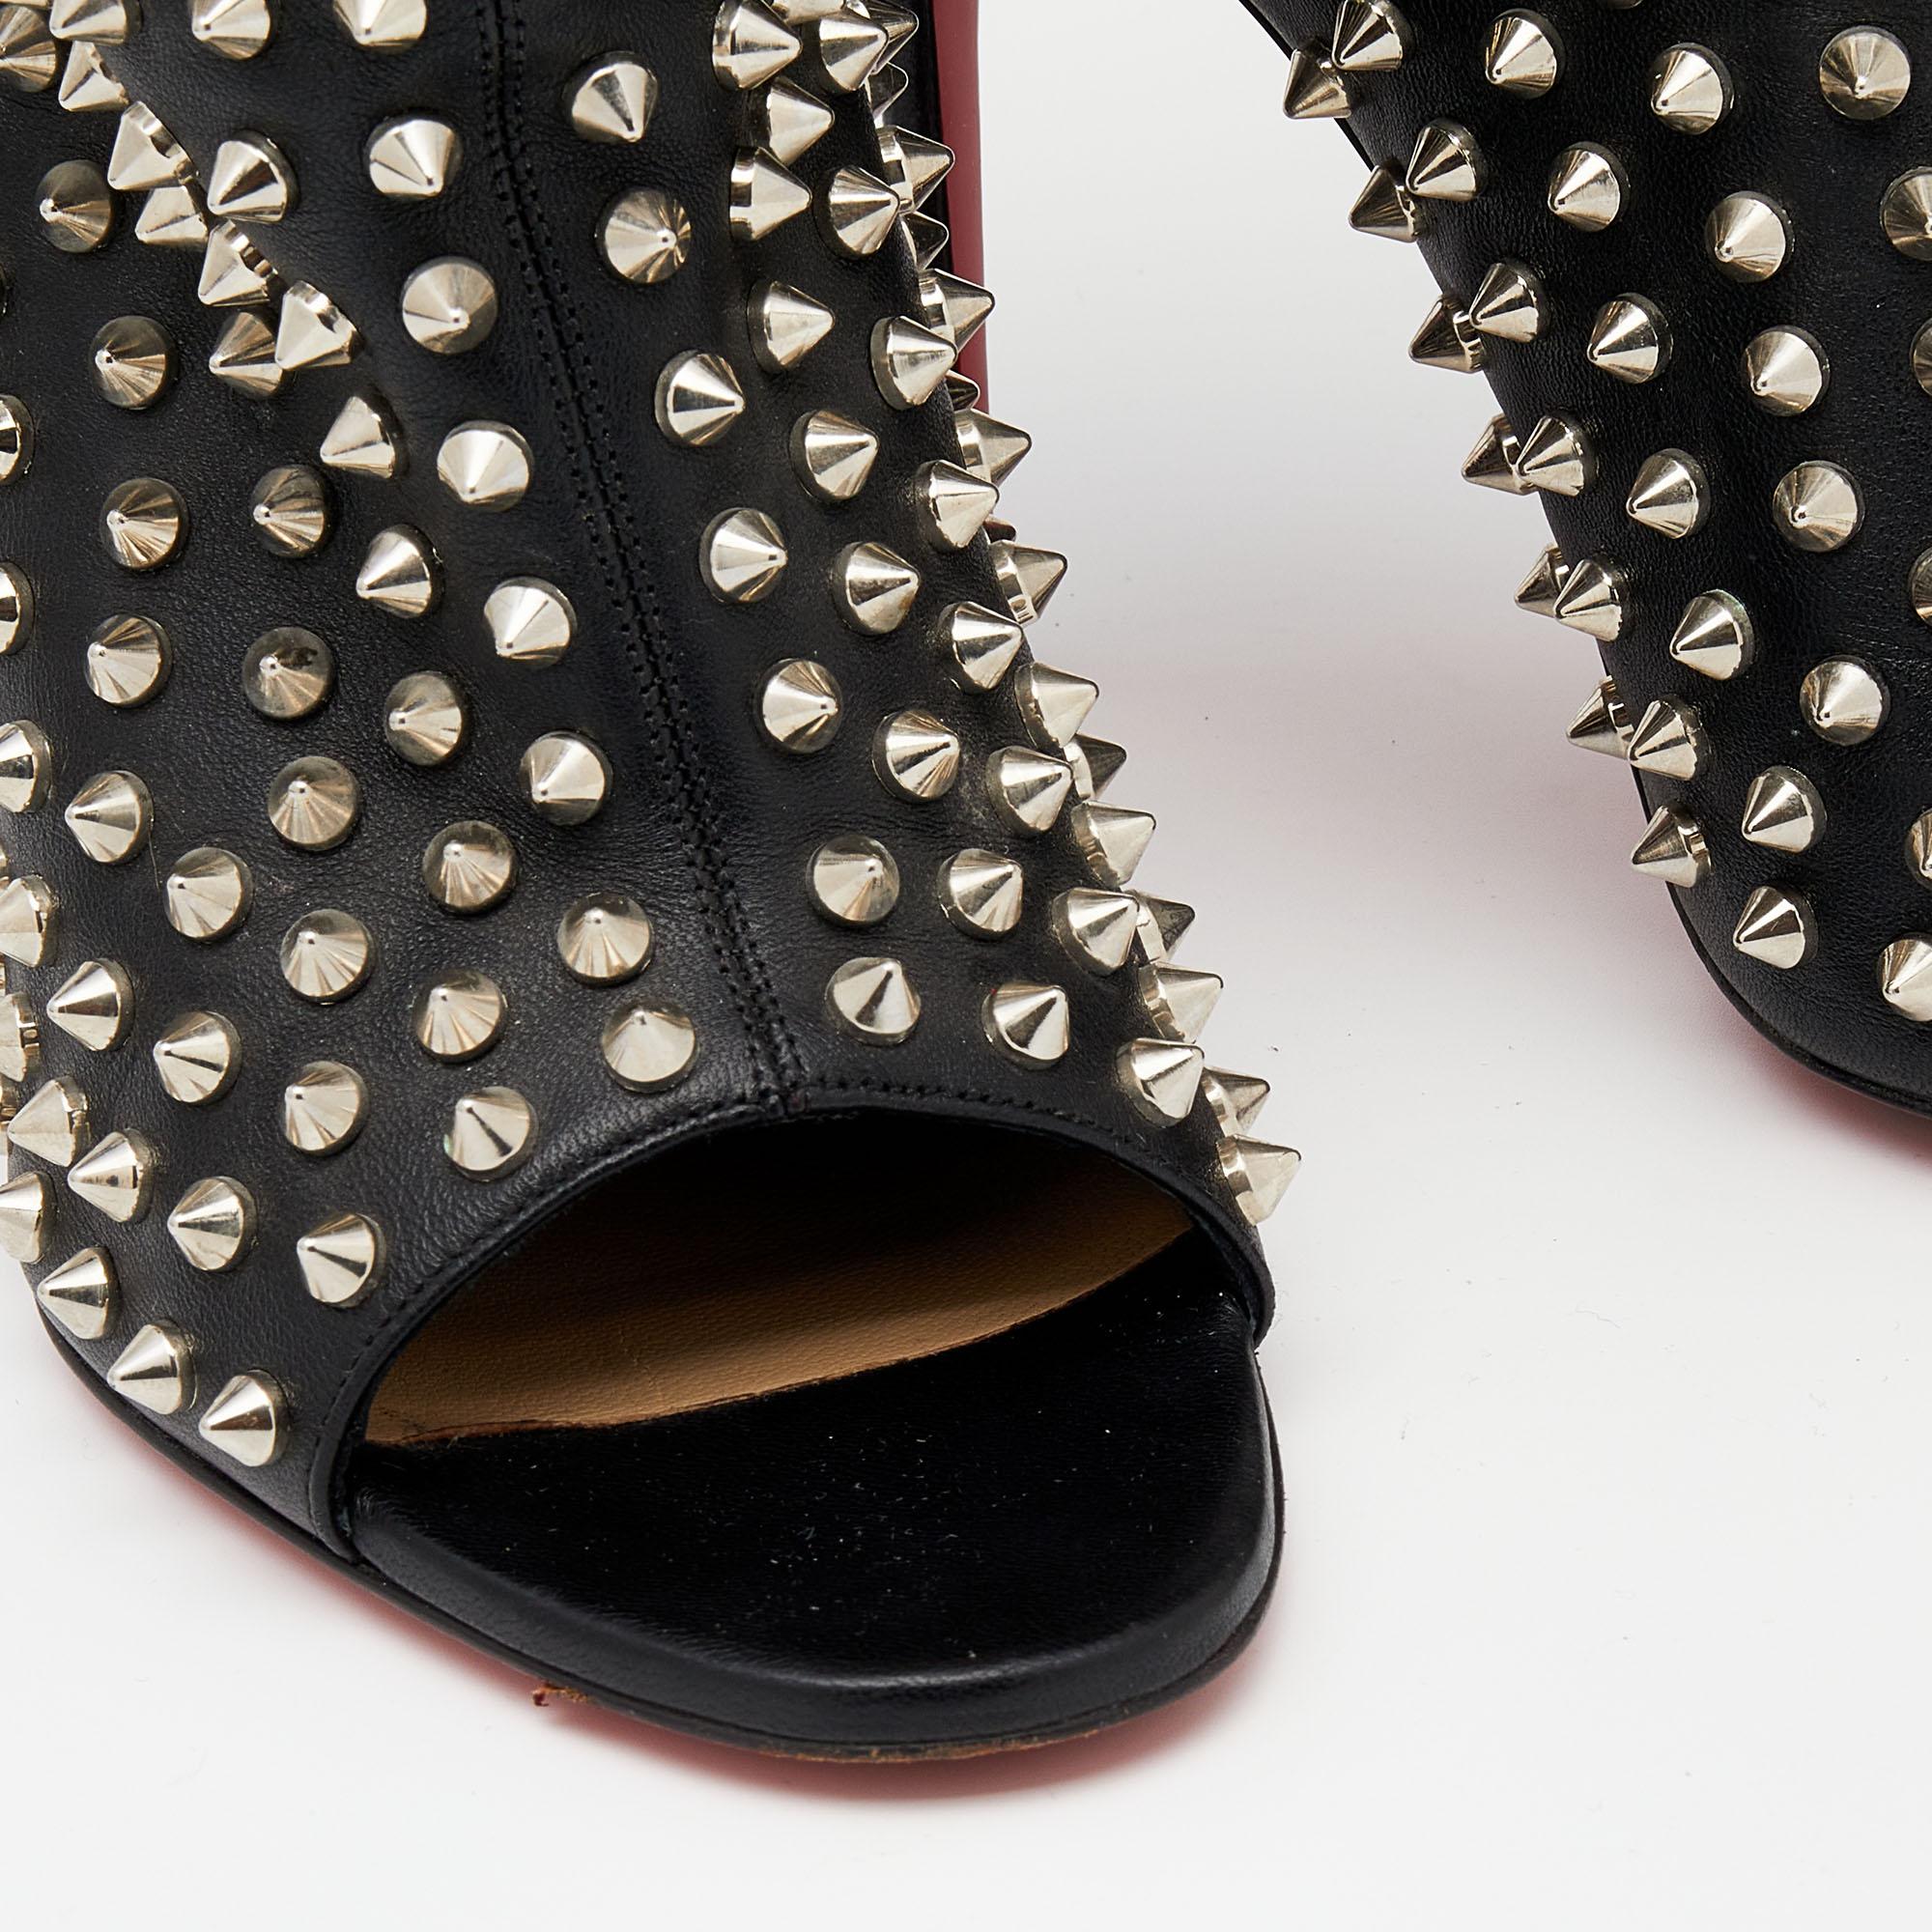 Christian Louboutin Black Spiked Guerilla Peep Toe Slouchy Ankle Boots Size 37.5 1